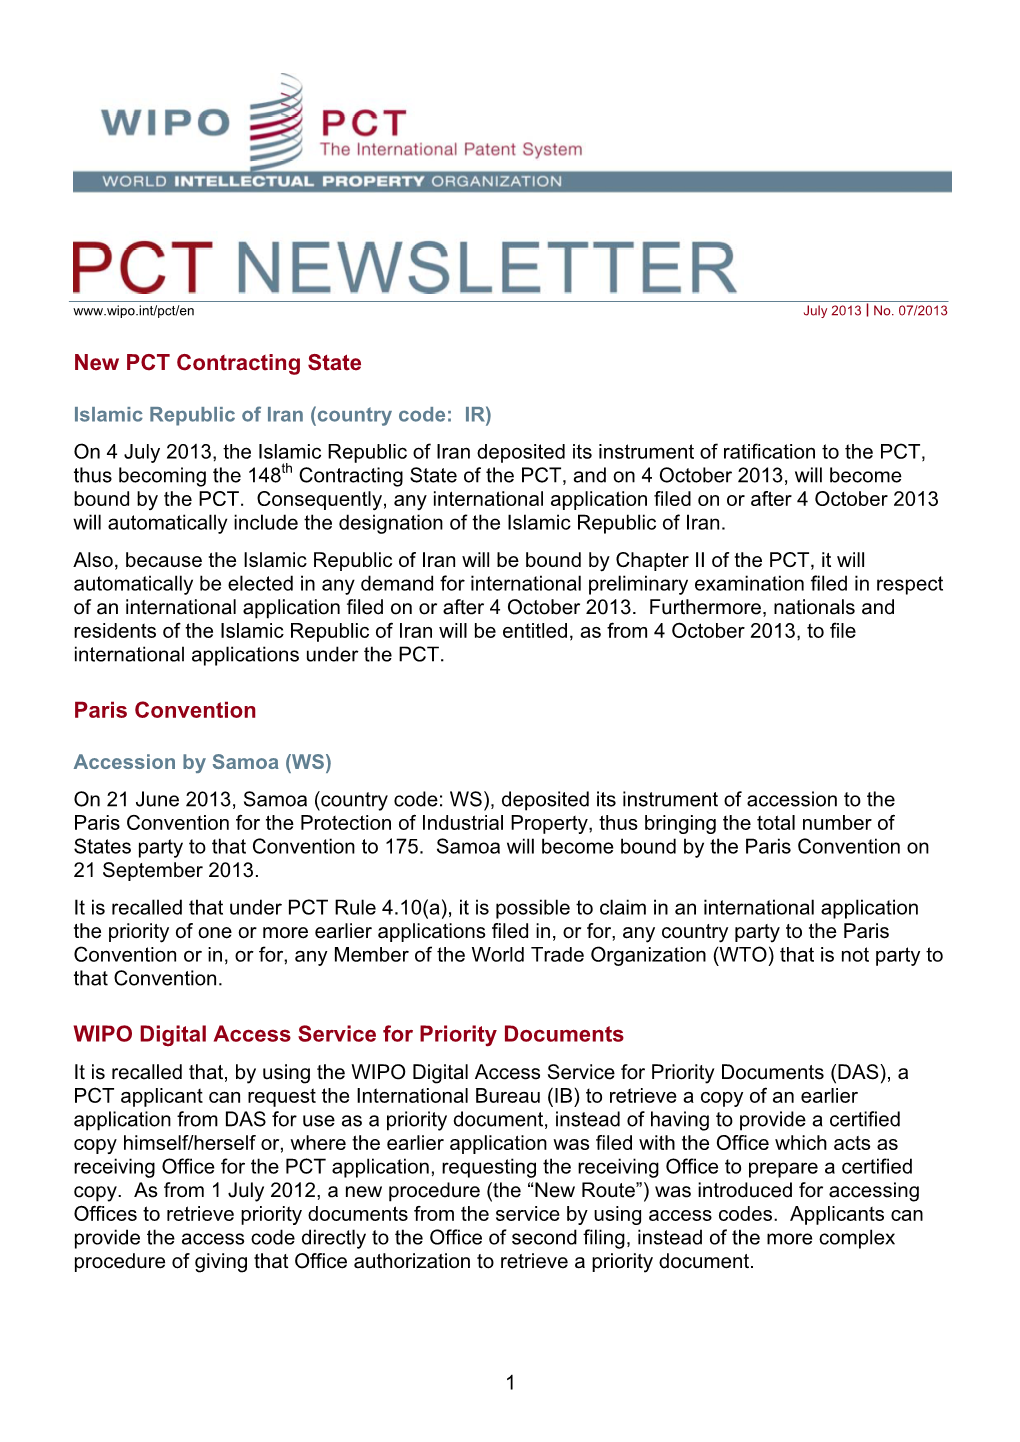 PCT NEWSLETTER No. 07/2013